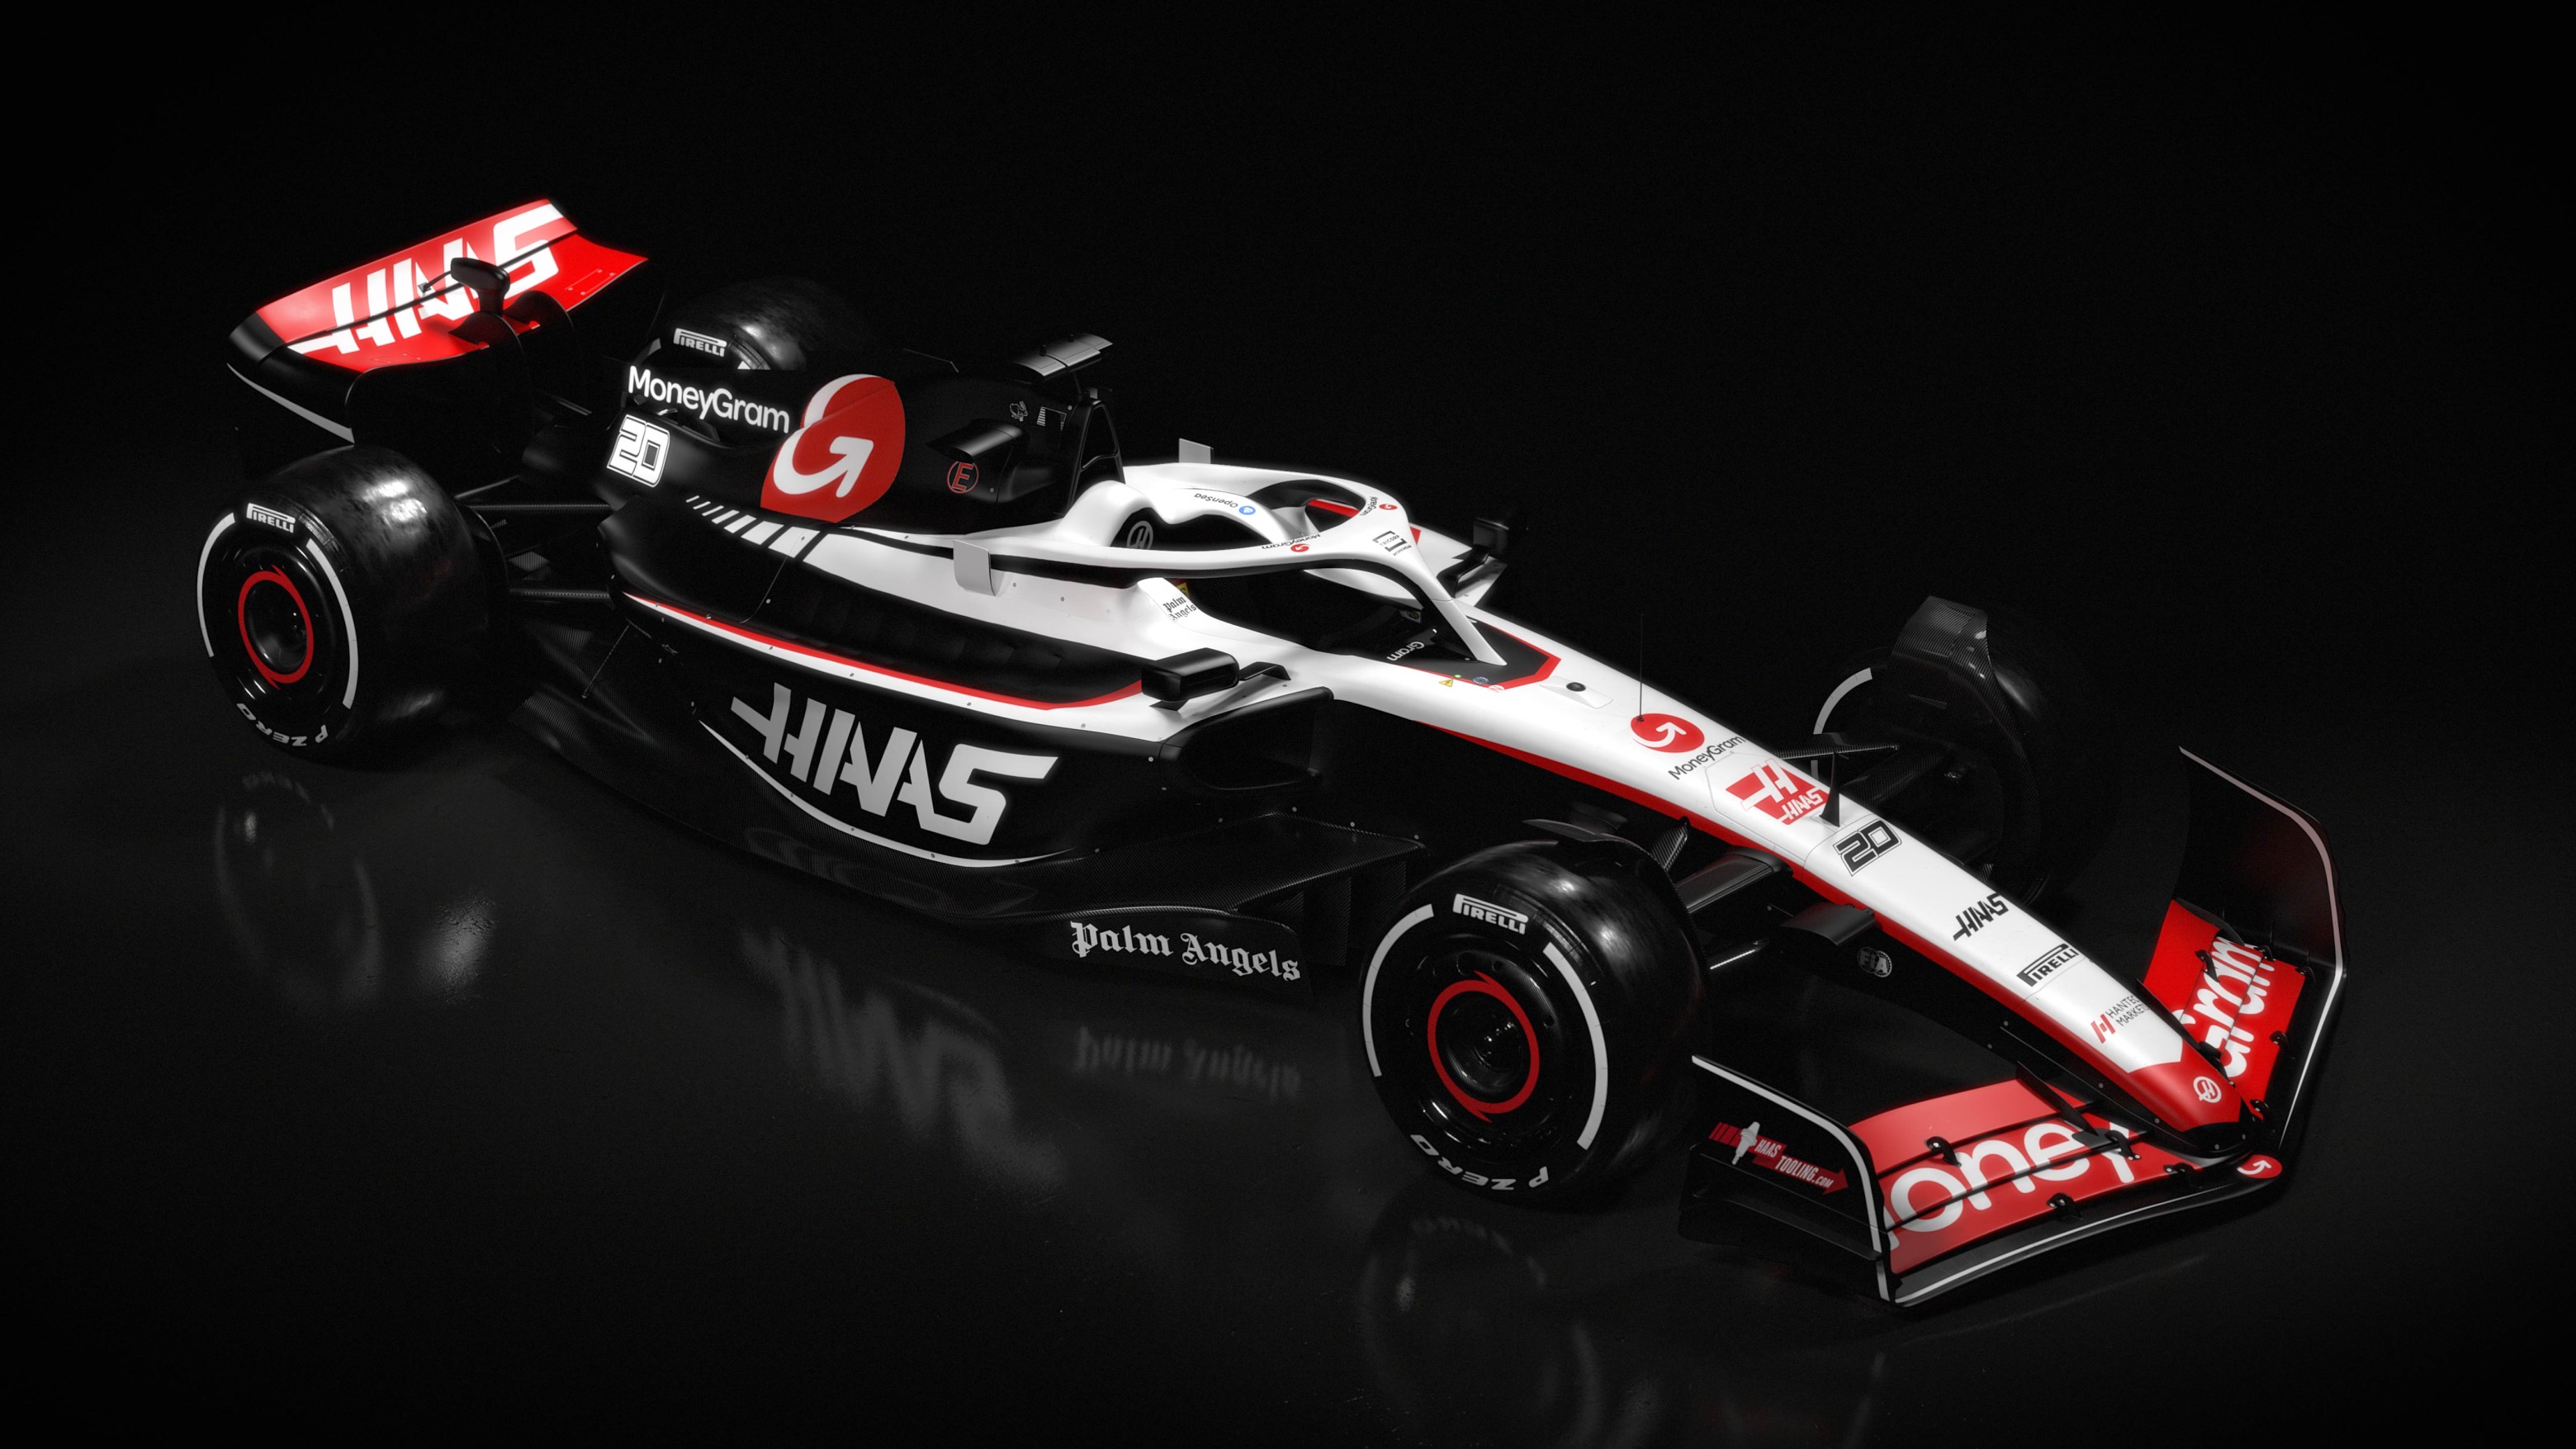 Haas F1 livery Kevin Magnussen